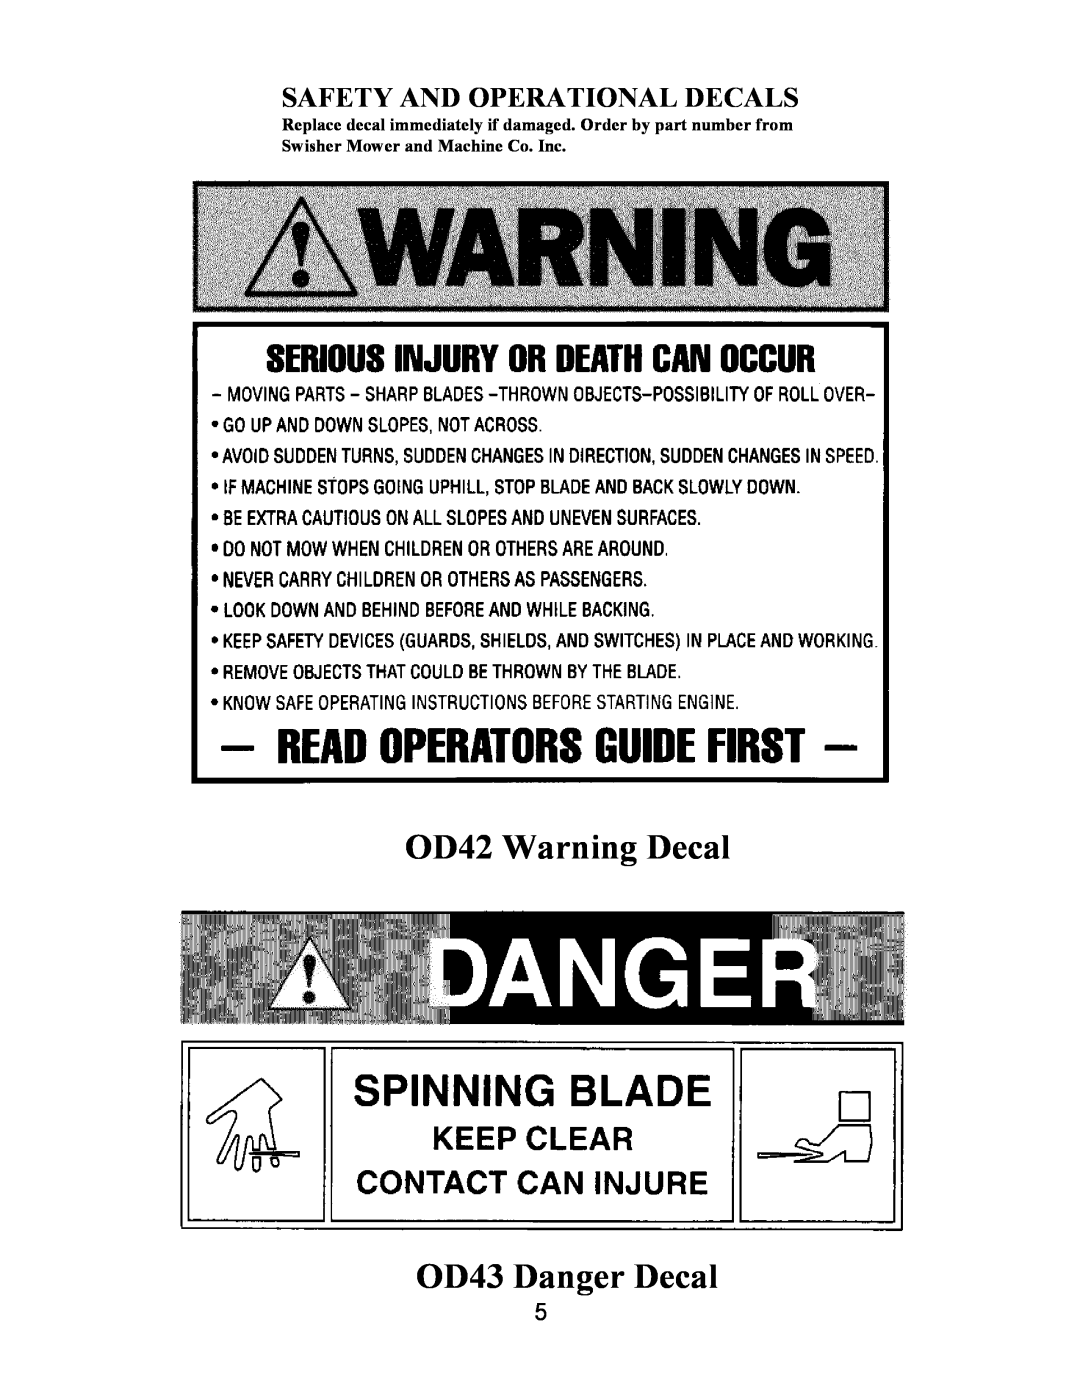 Swisher T1360, T1260, T1260, T1360 owner manual OD42 Warning Decal OD43 Danger Decal, Safety And Operational Decals 